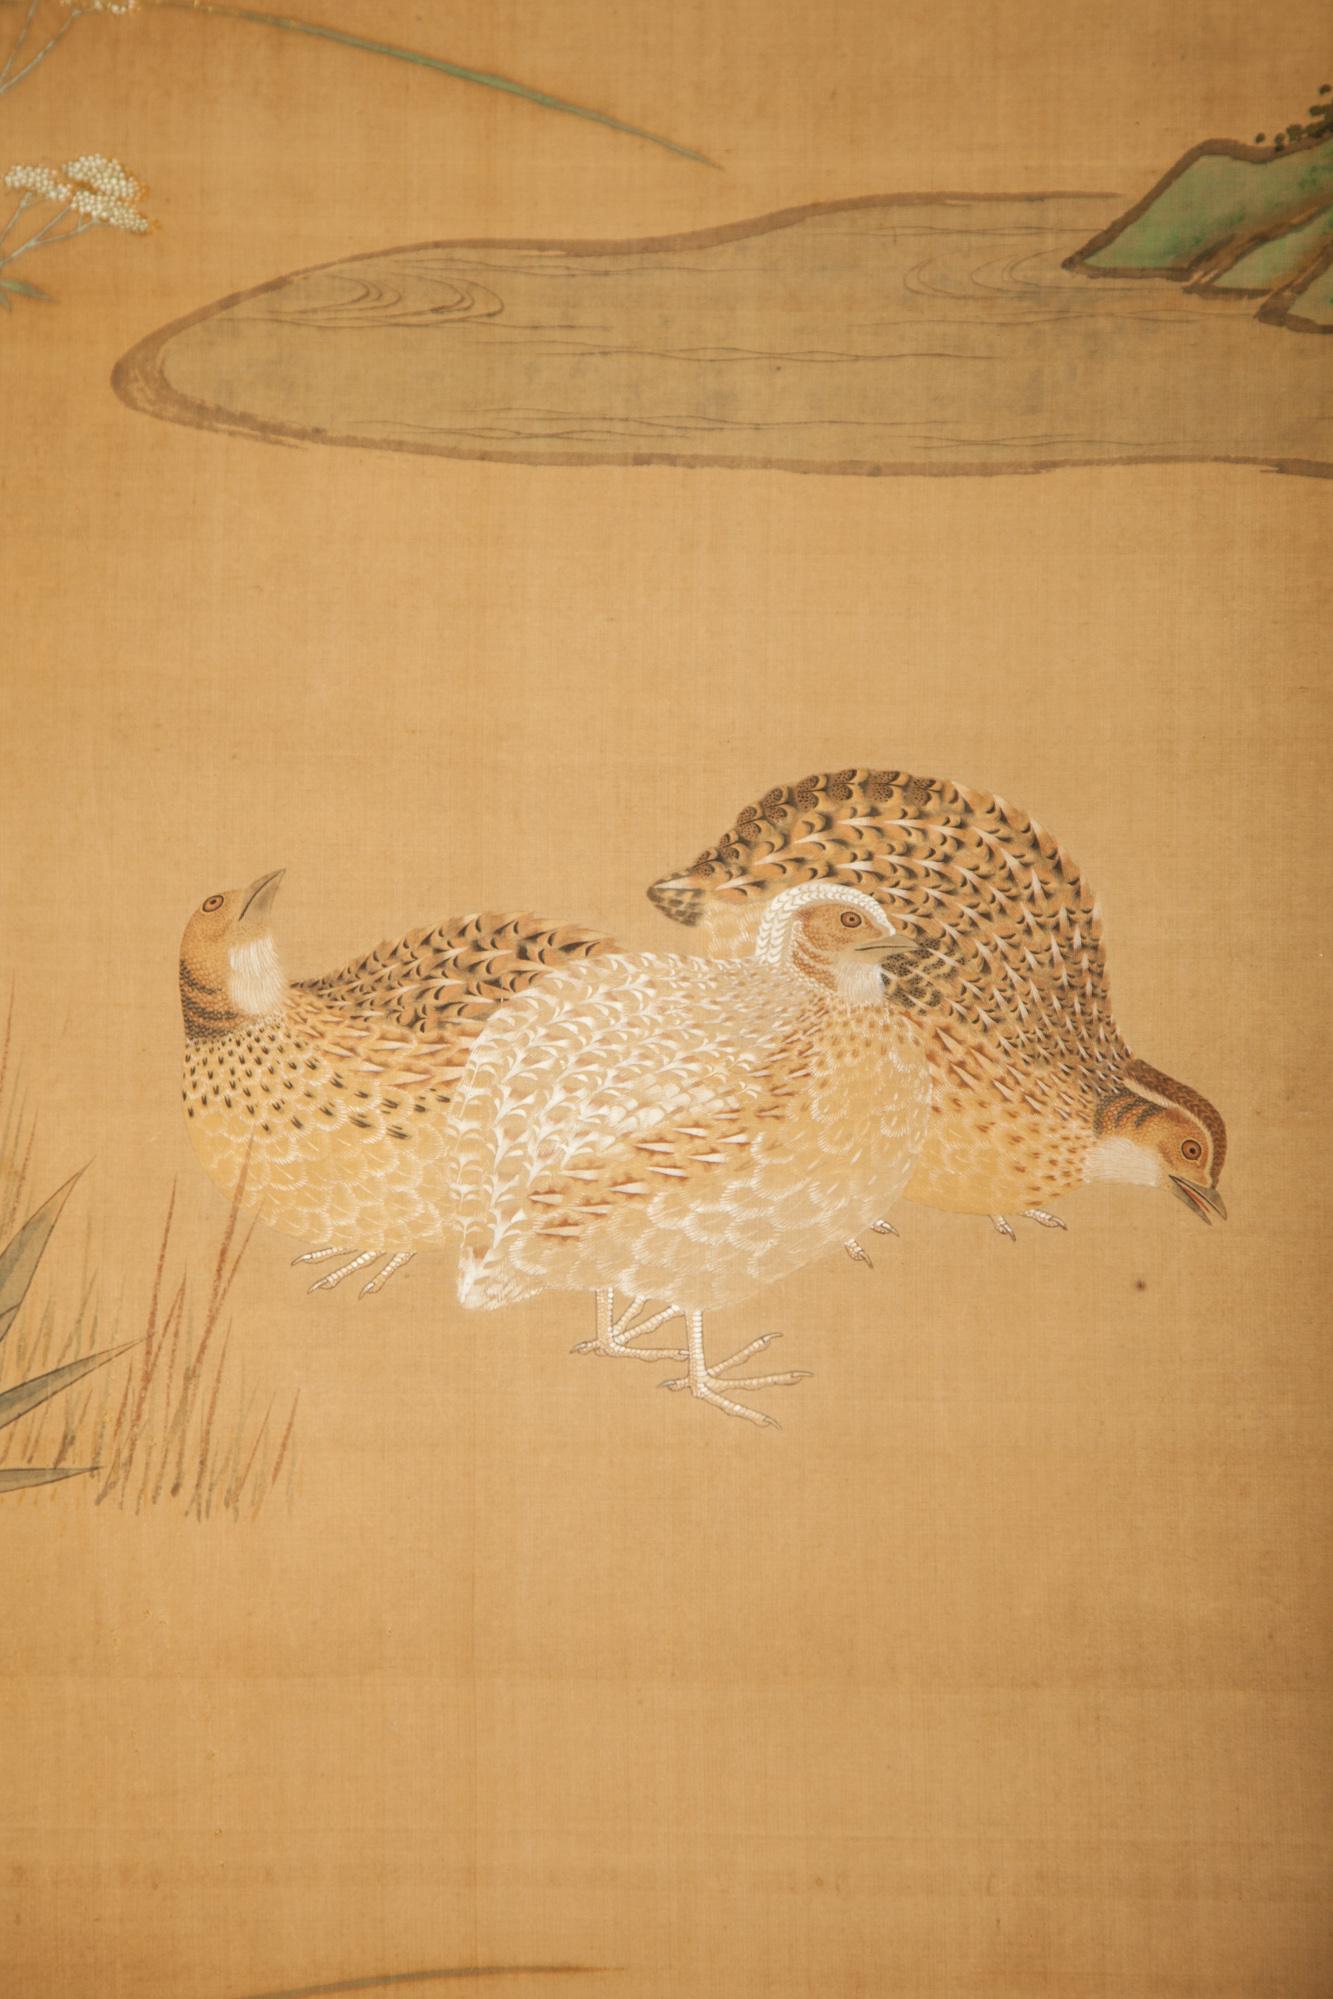 Quails roaming a field with wild flowers and grasses next to a meandering stream. Mountain peaks in the distance. A serene landscape. Soft mineral pigments, ink, and gold dust on silk with a silk brocade border. Signature and seal read: Fujiwara